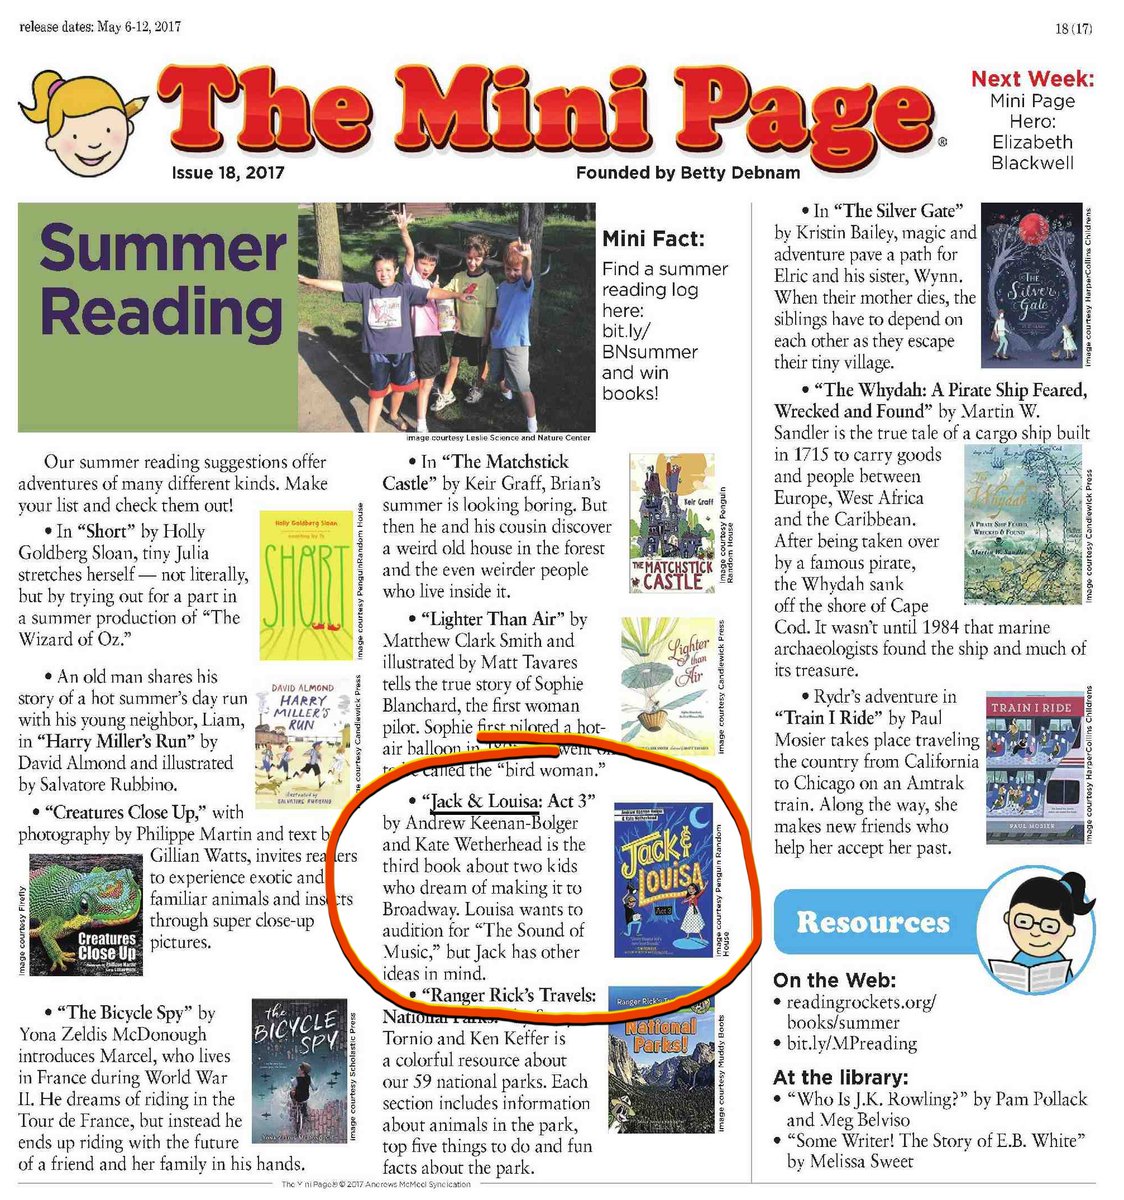 'The Mini Page,' a nationally syndicated kids book column, has included #JackAndLouisa: ACT 3 in their summer reading round up!